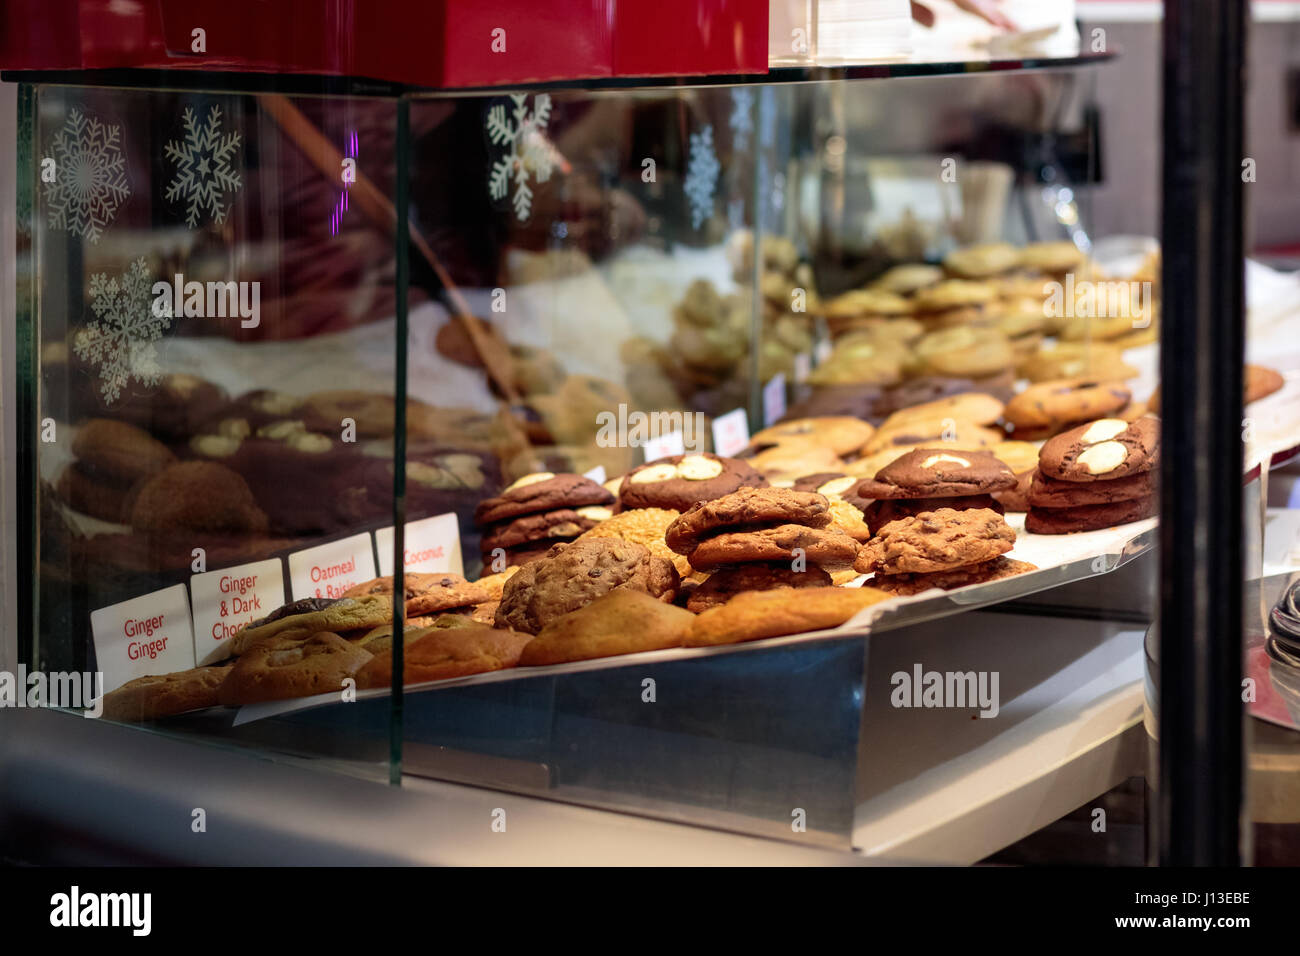 Biscuits on display at Covent Garden in London Stock Photo